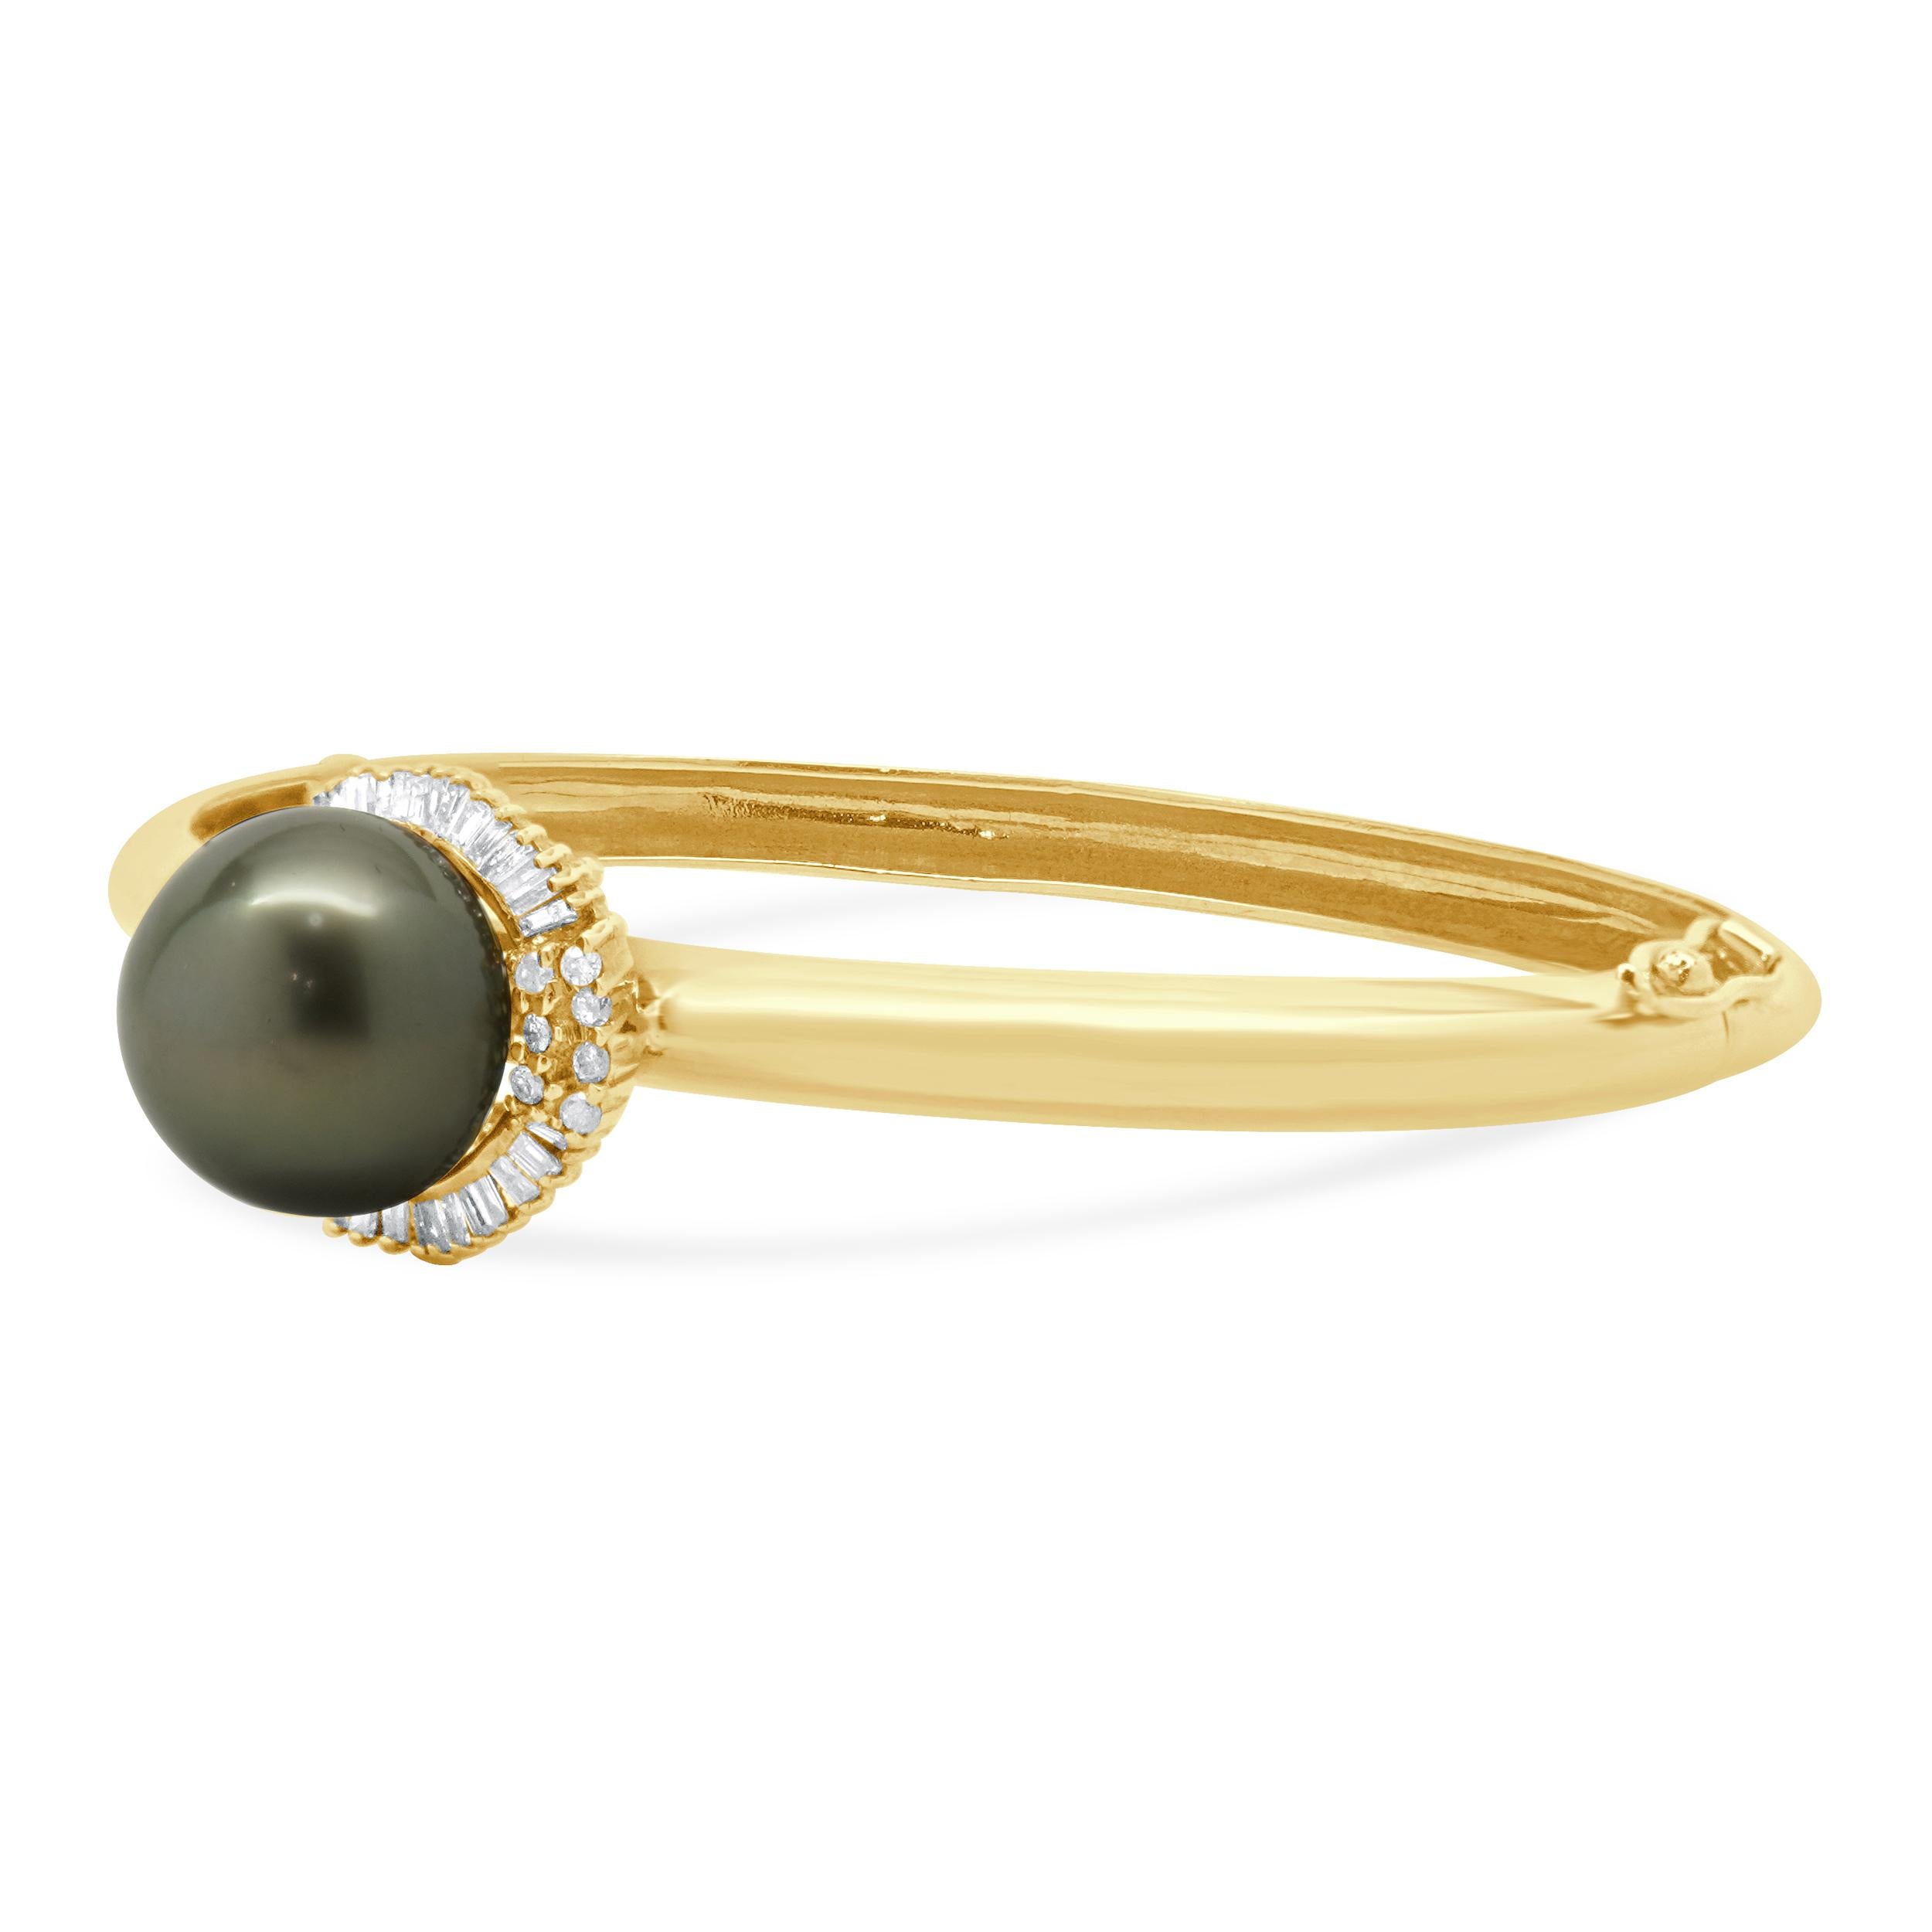 Designer: custom
Material: 14K yellow gold
Black Pearl: 1 round cut = 13.7mm
Diamond: 46 round and baguette cut = 1.25cttw
Color: G-H
Clarity: I3
Dimensions: bracelet will fit up to a 6.75-inch wrist
Weight: 15.63 grams
